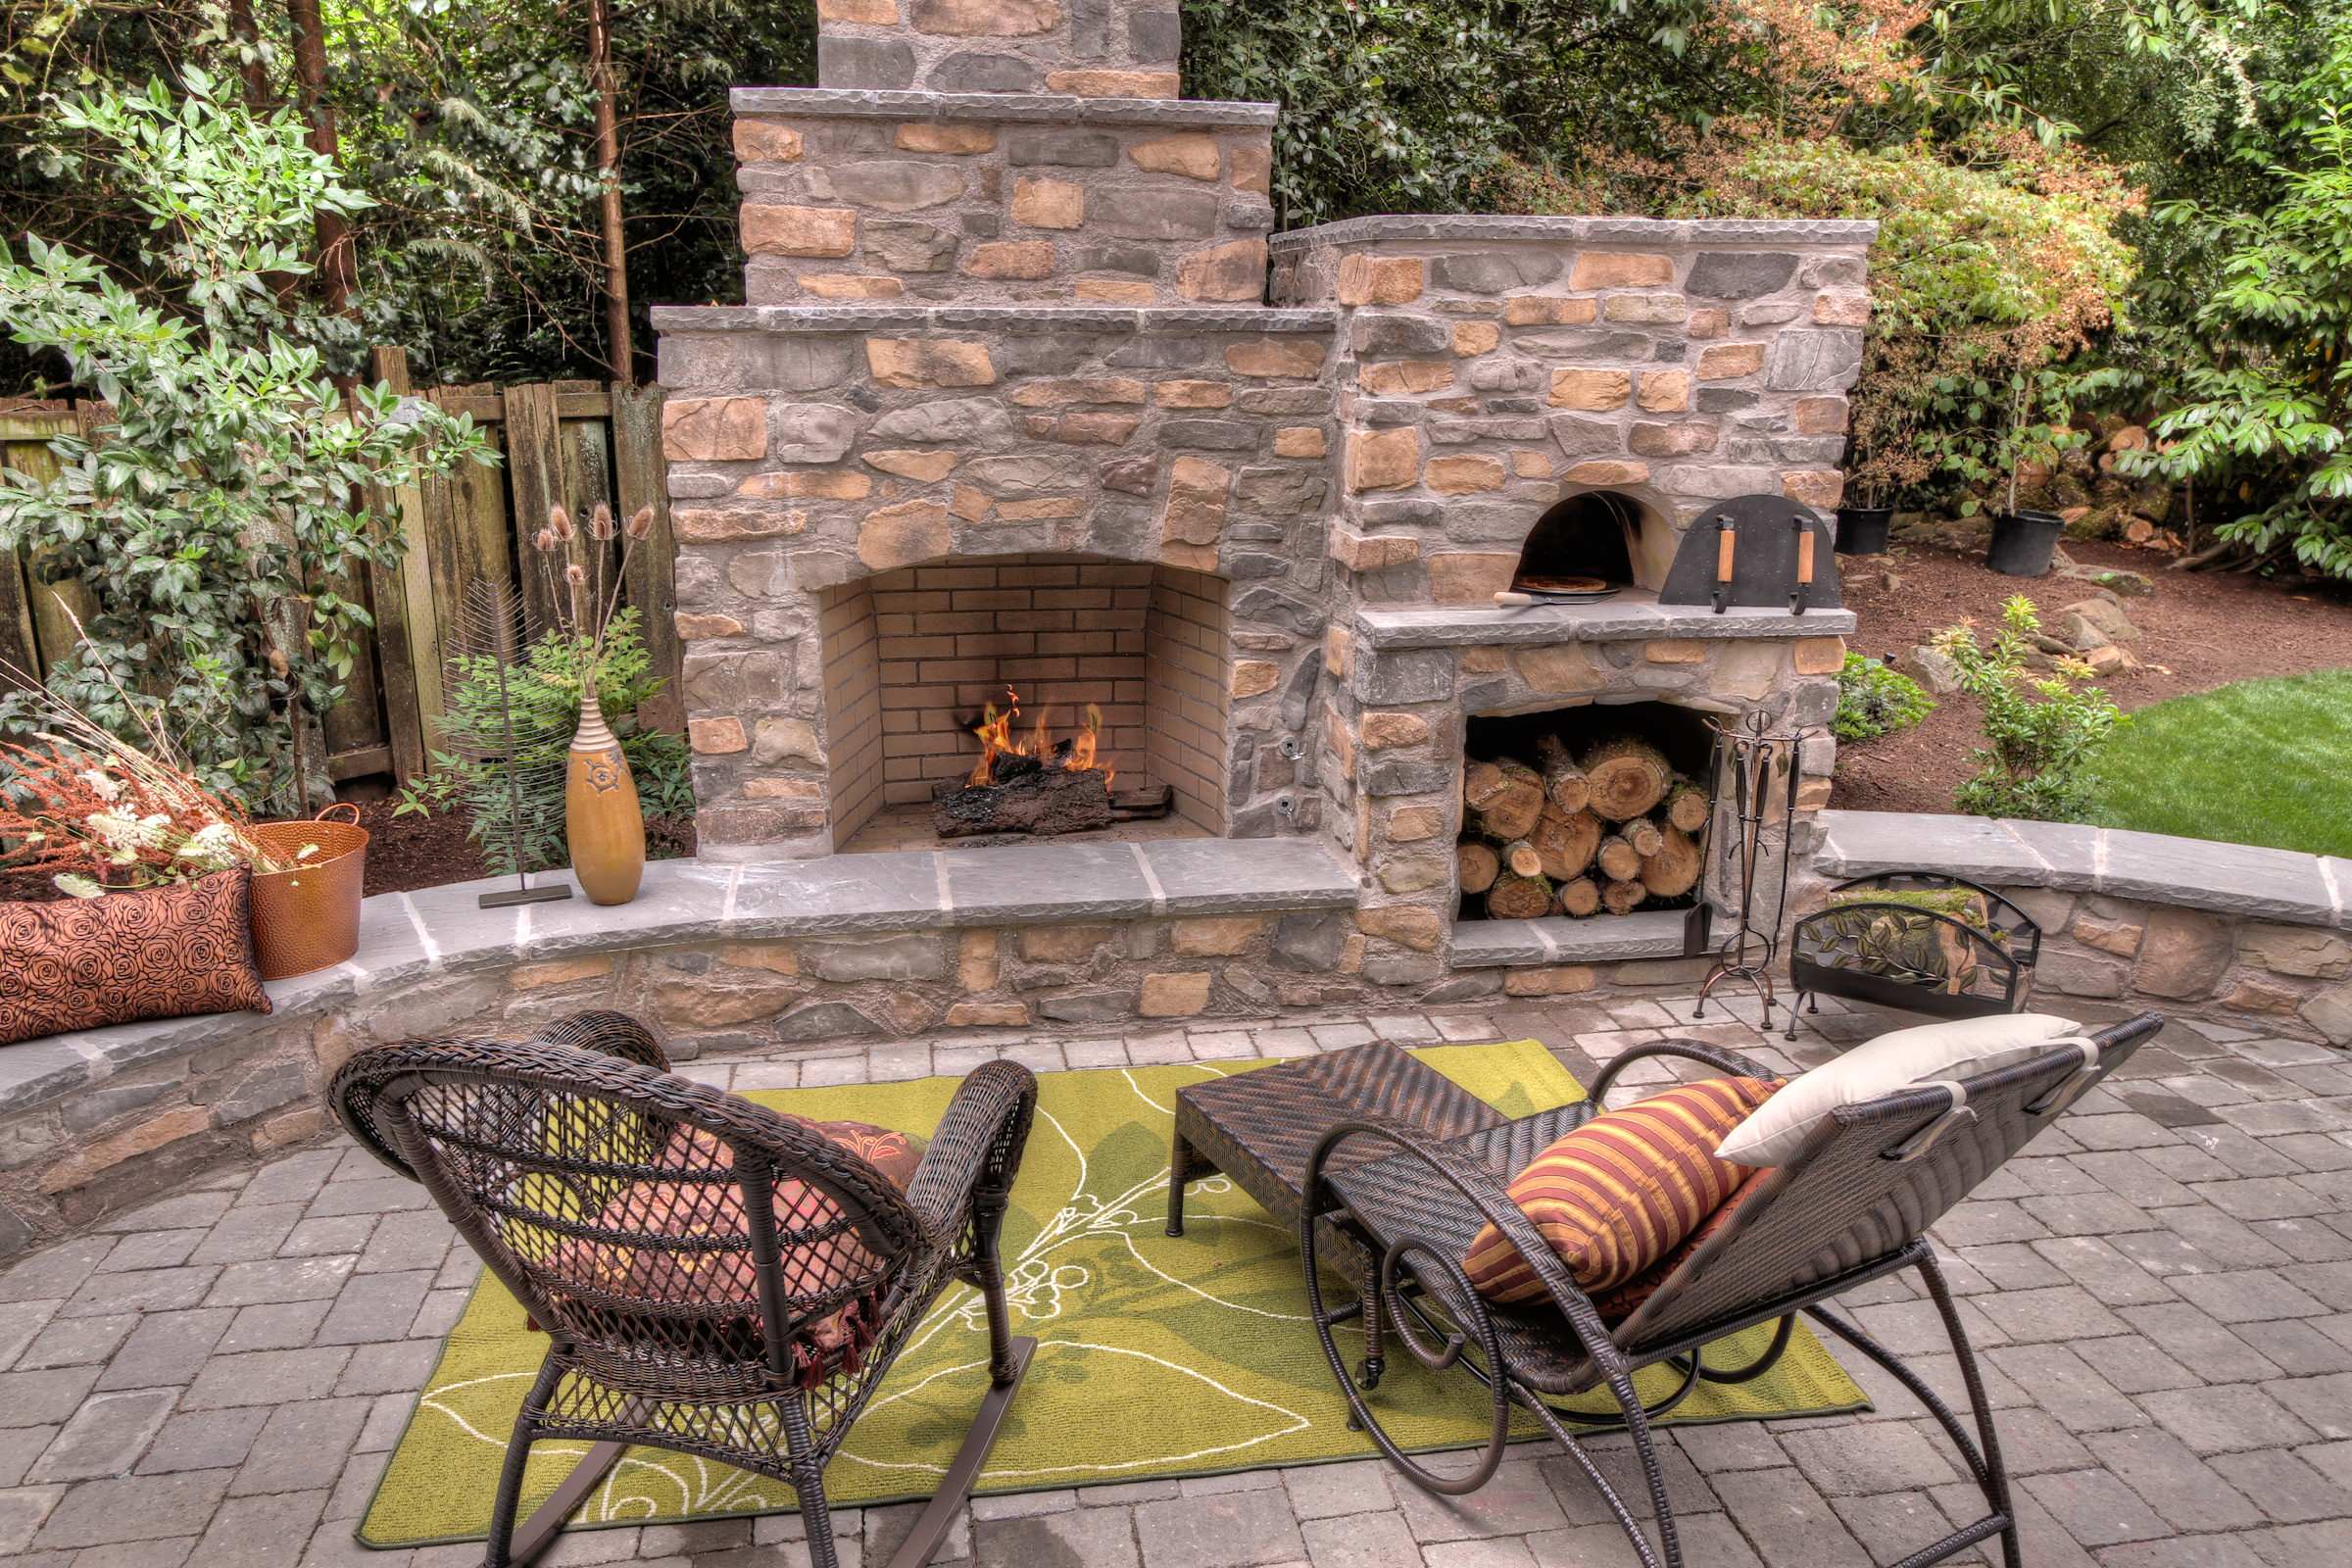 Outdoor Fireplace And Pizza Oven Houzz, Outdoor Fireplace Pizza Oven Insert